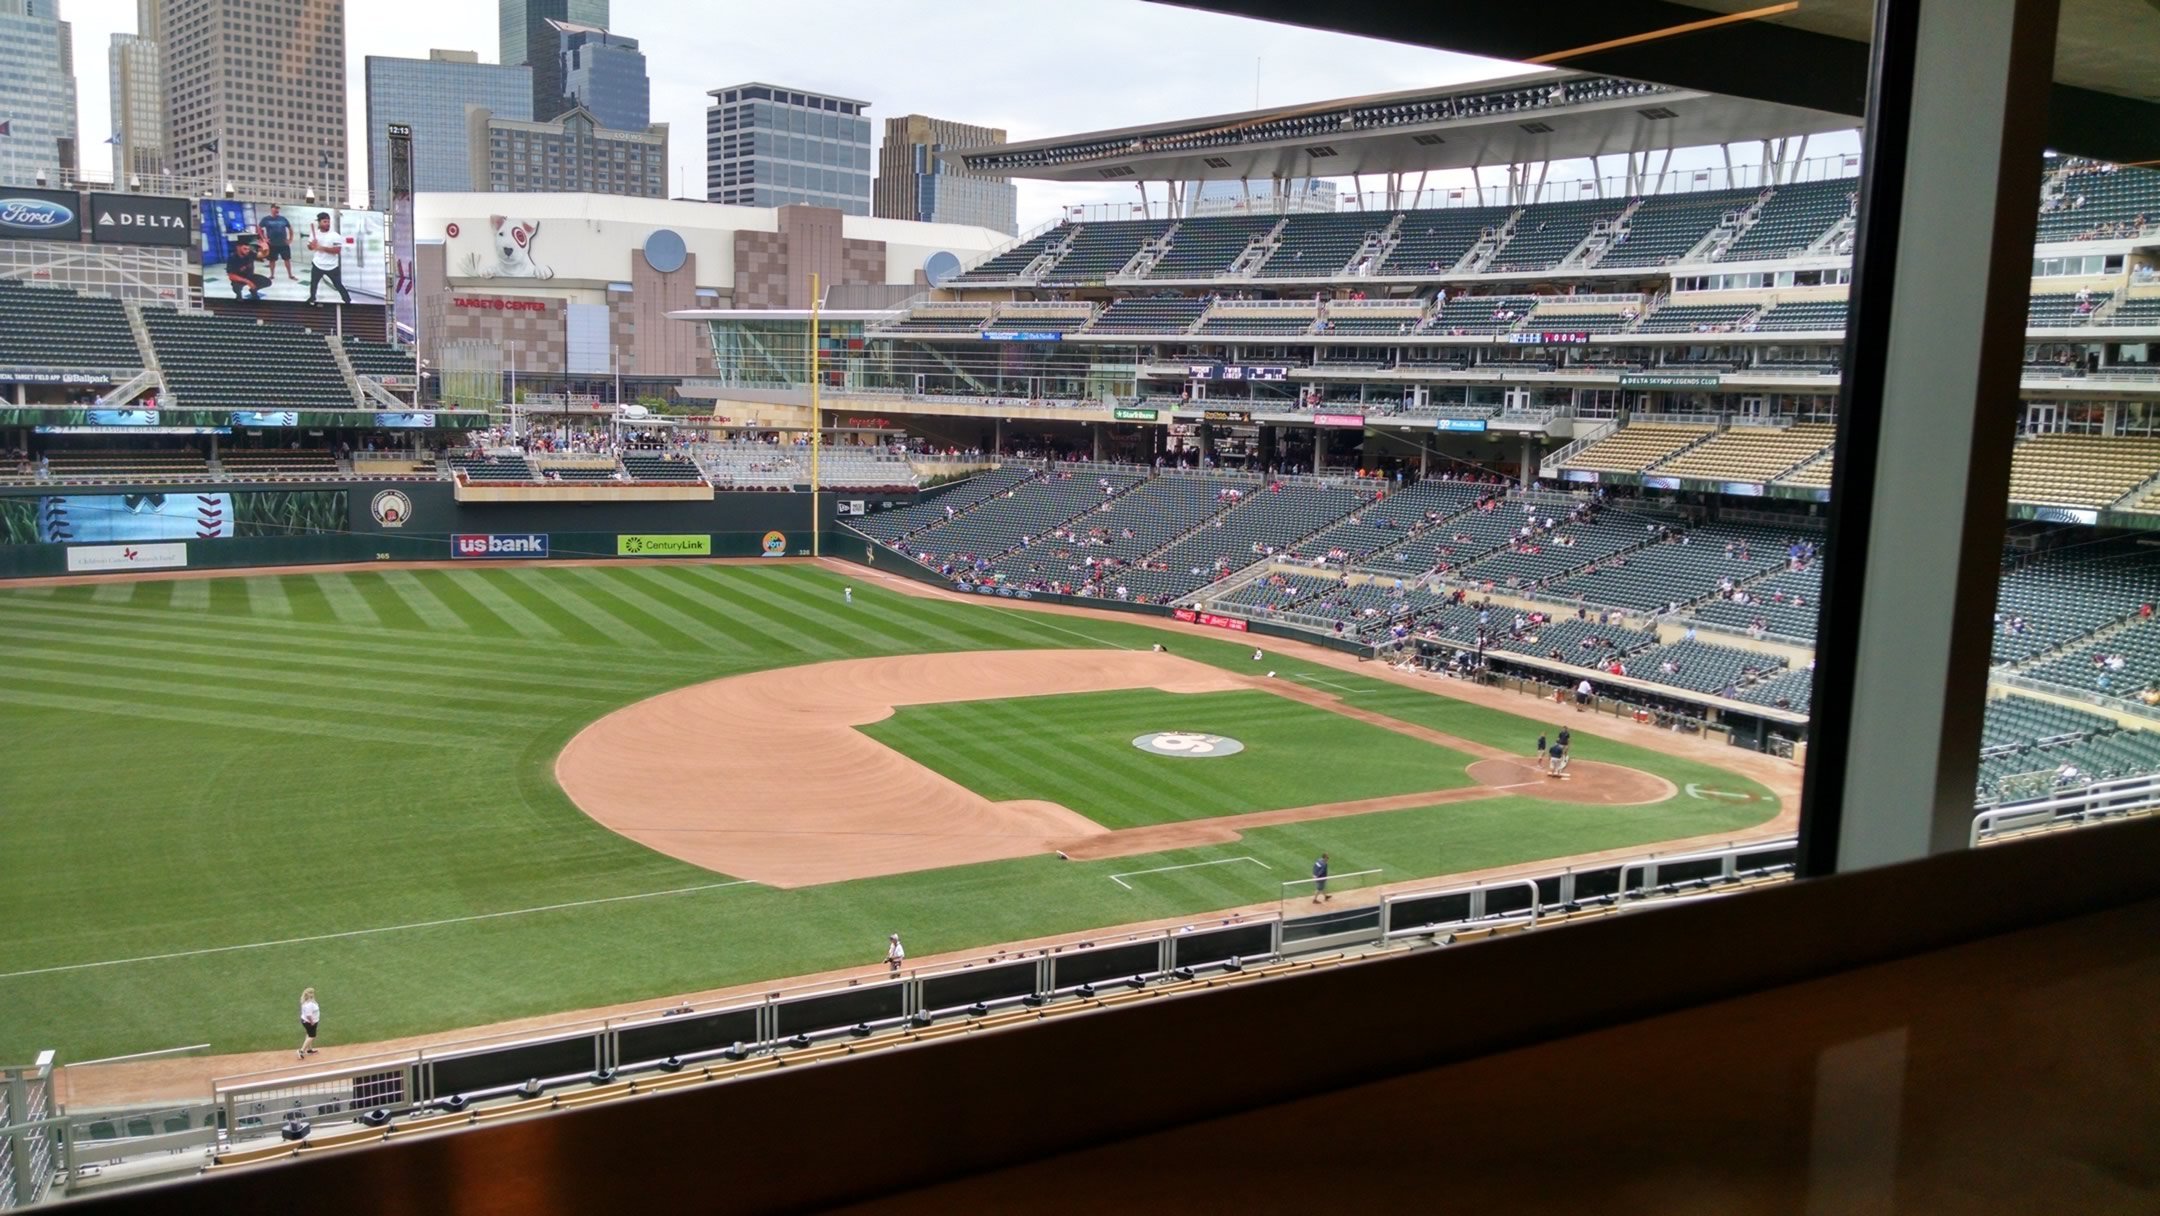 Target Field Seating Chart Interactive